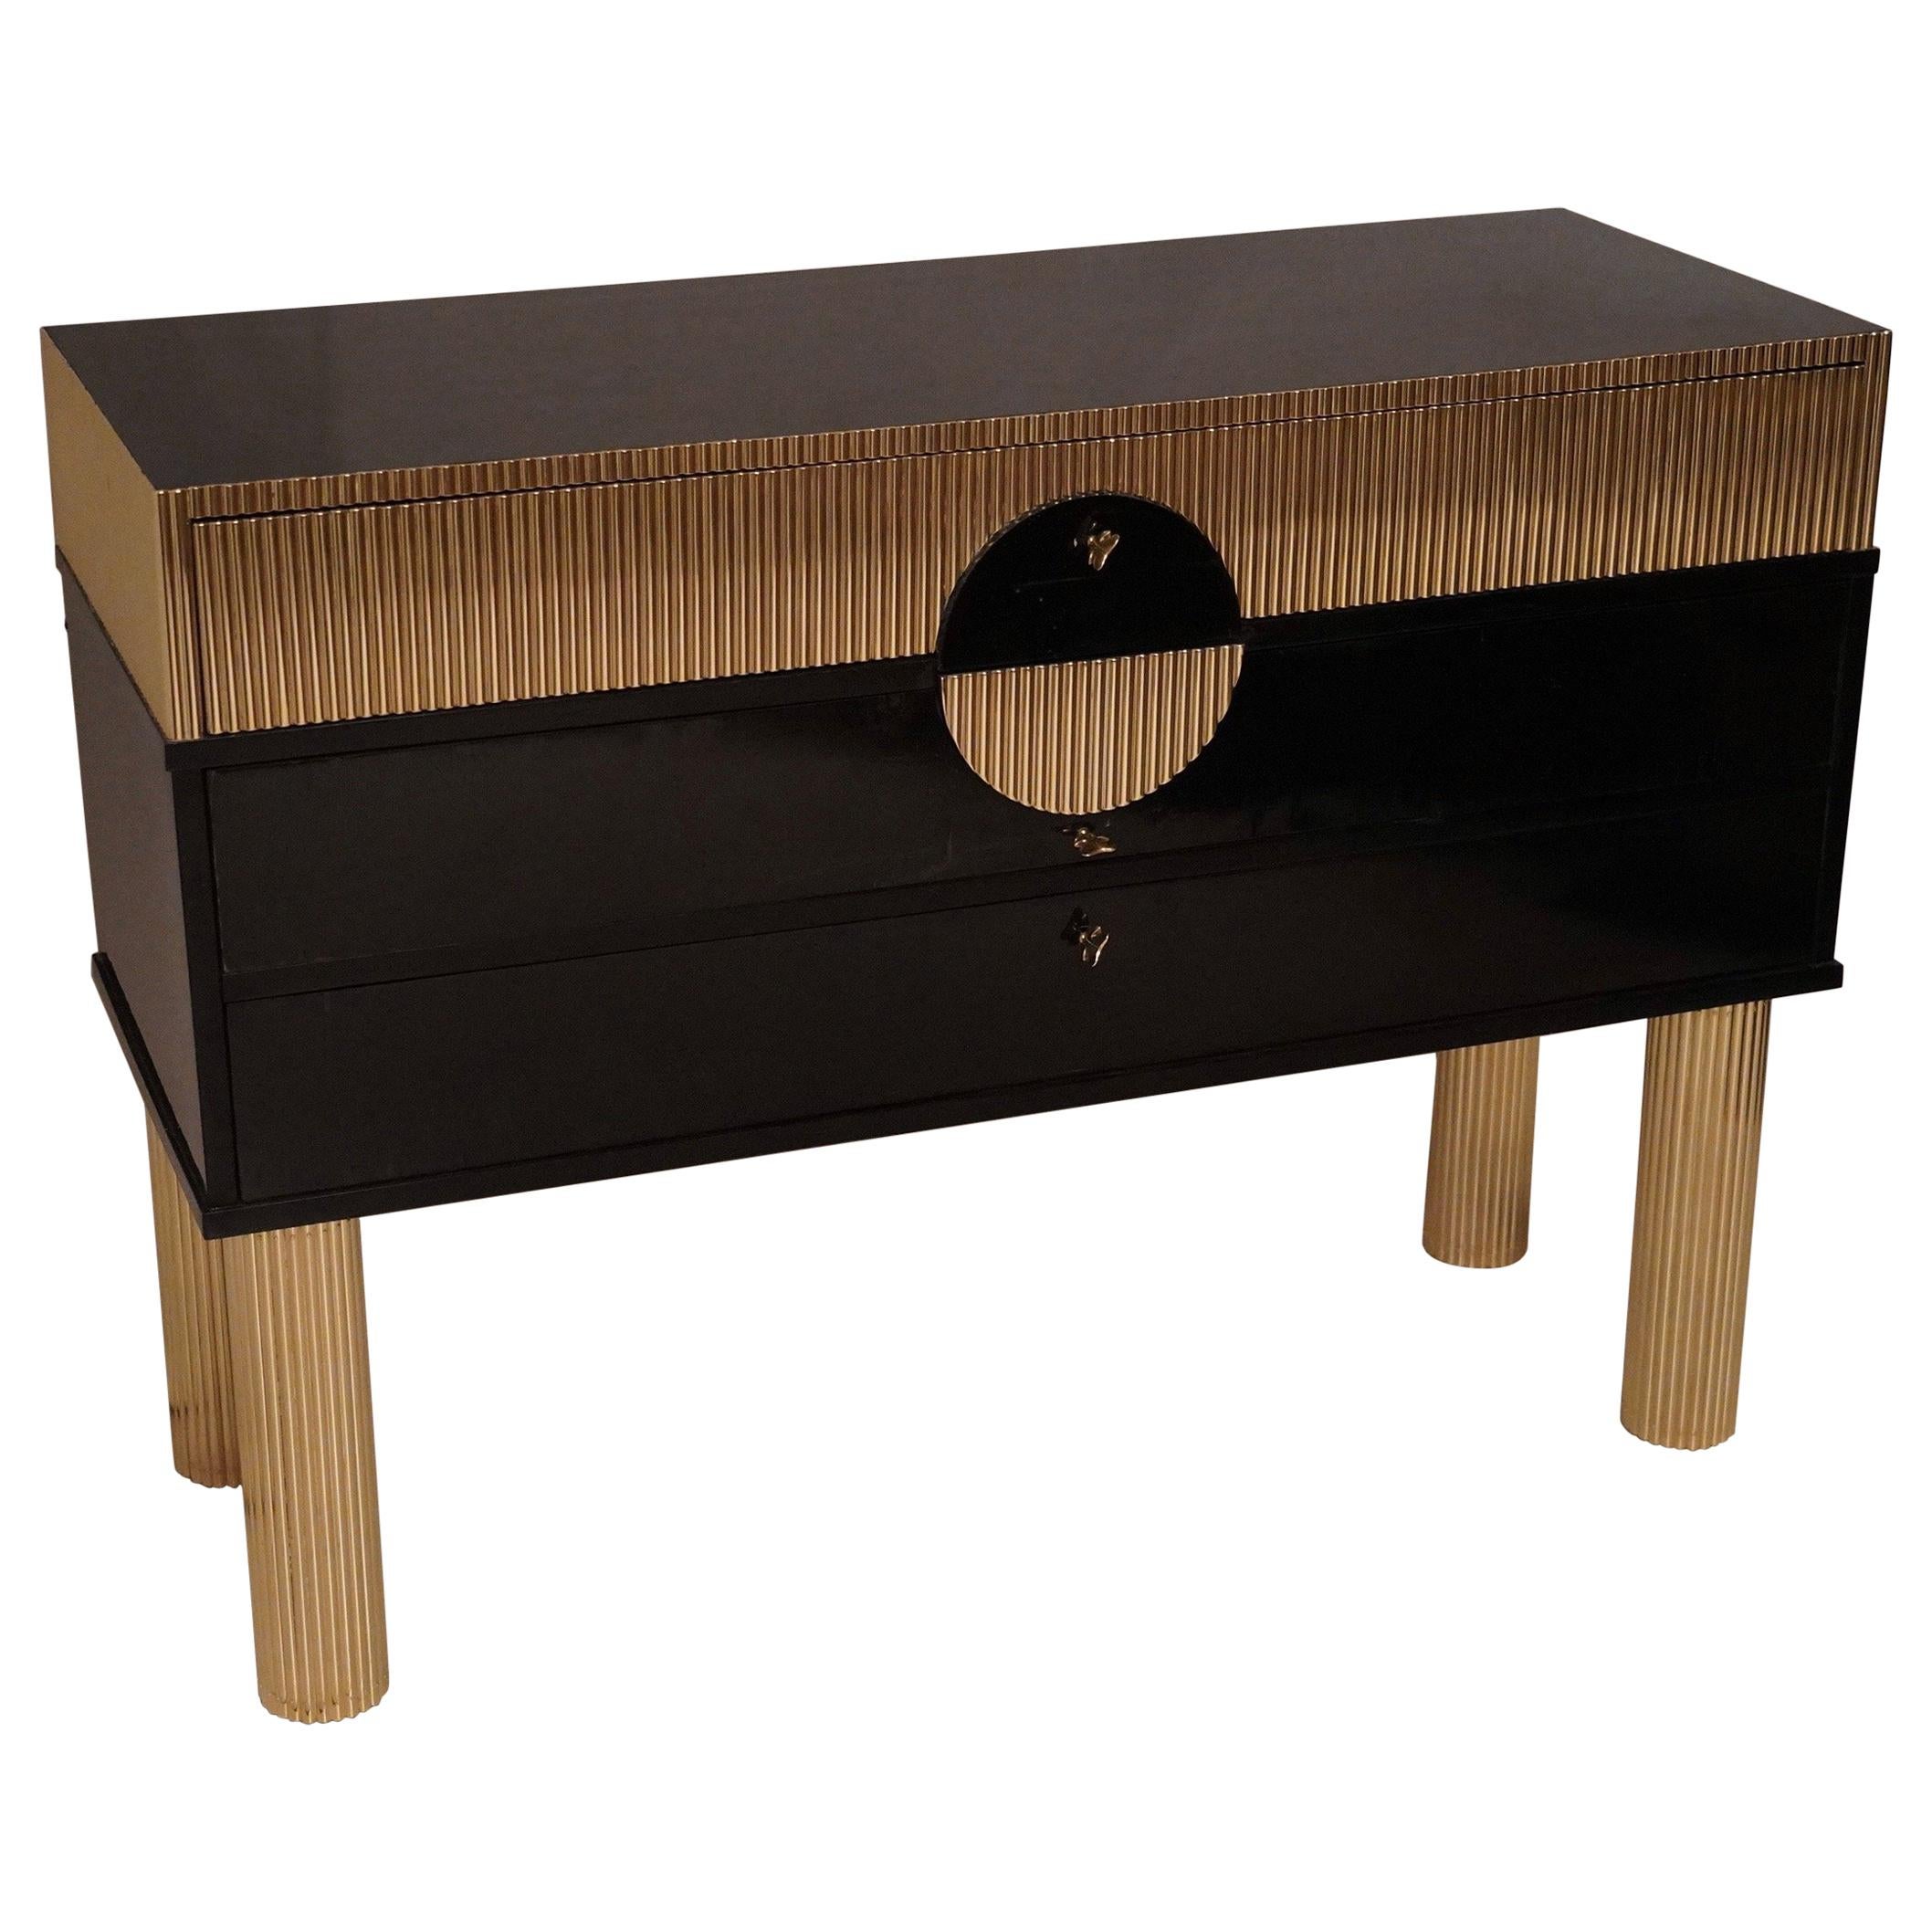 Midcentury Black Shellac and Semi Round Brass Rods Commodes, 1970